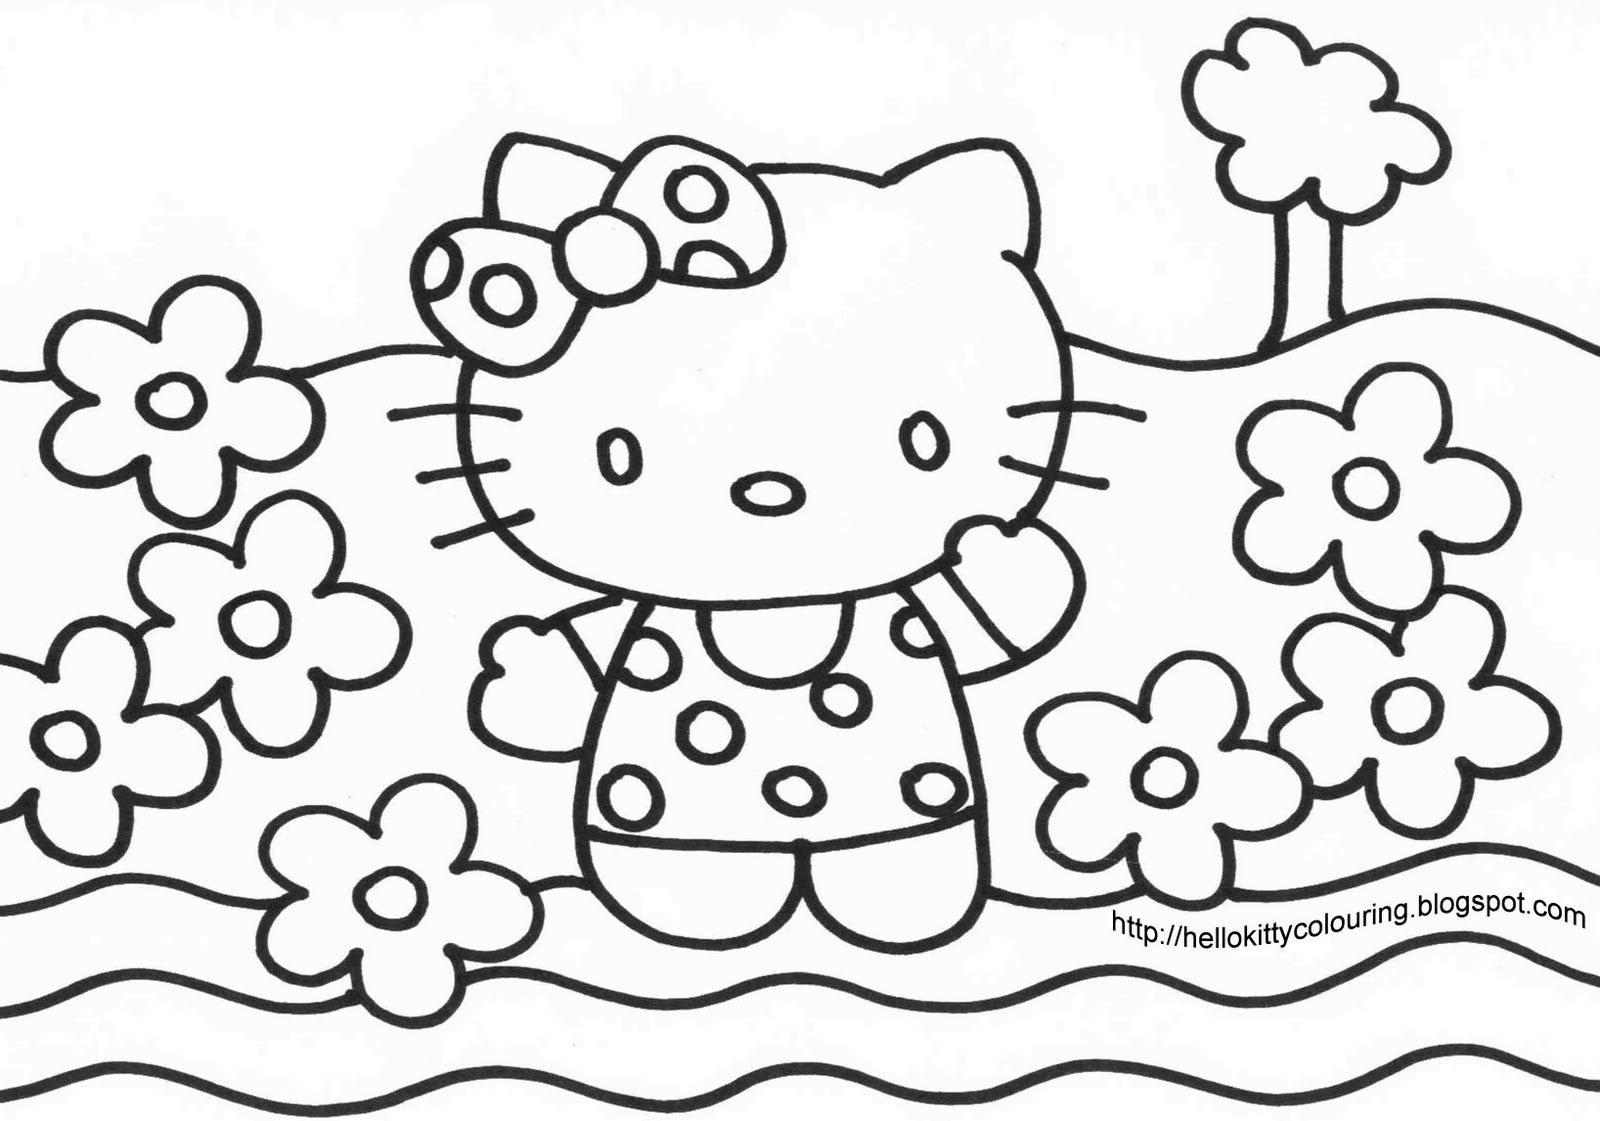 coloring page hello kitty | Only Coloring Pages